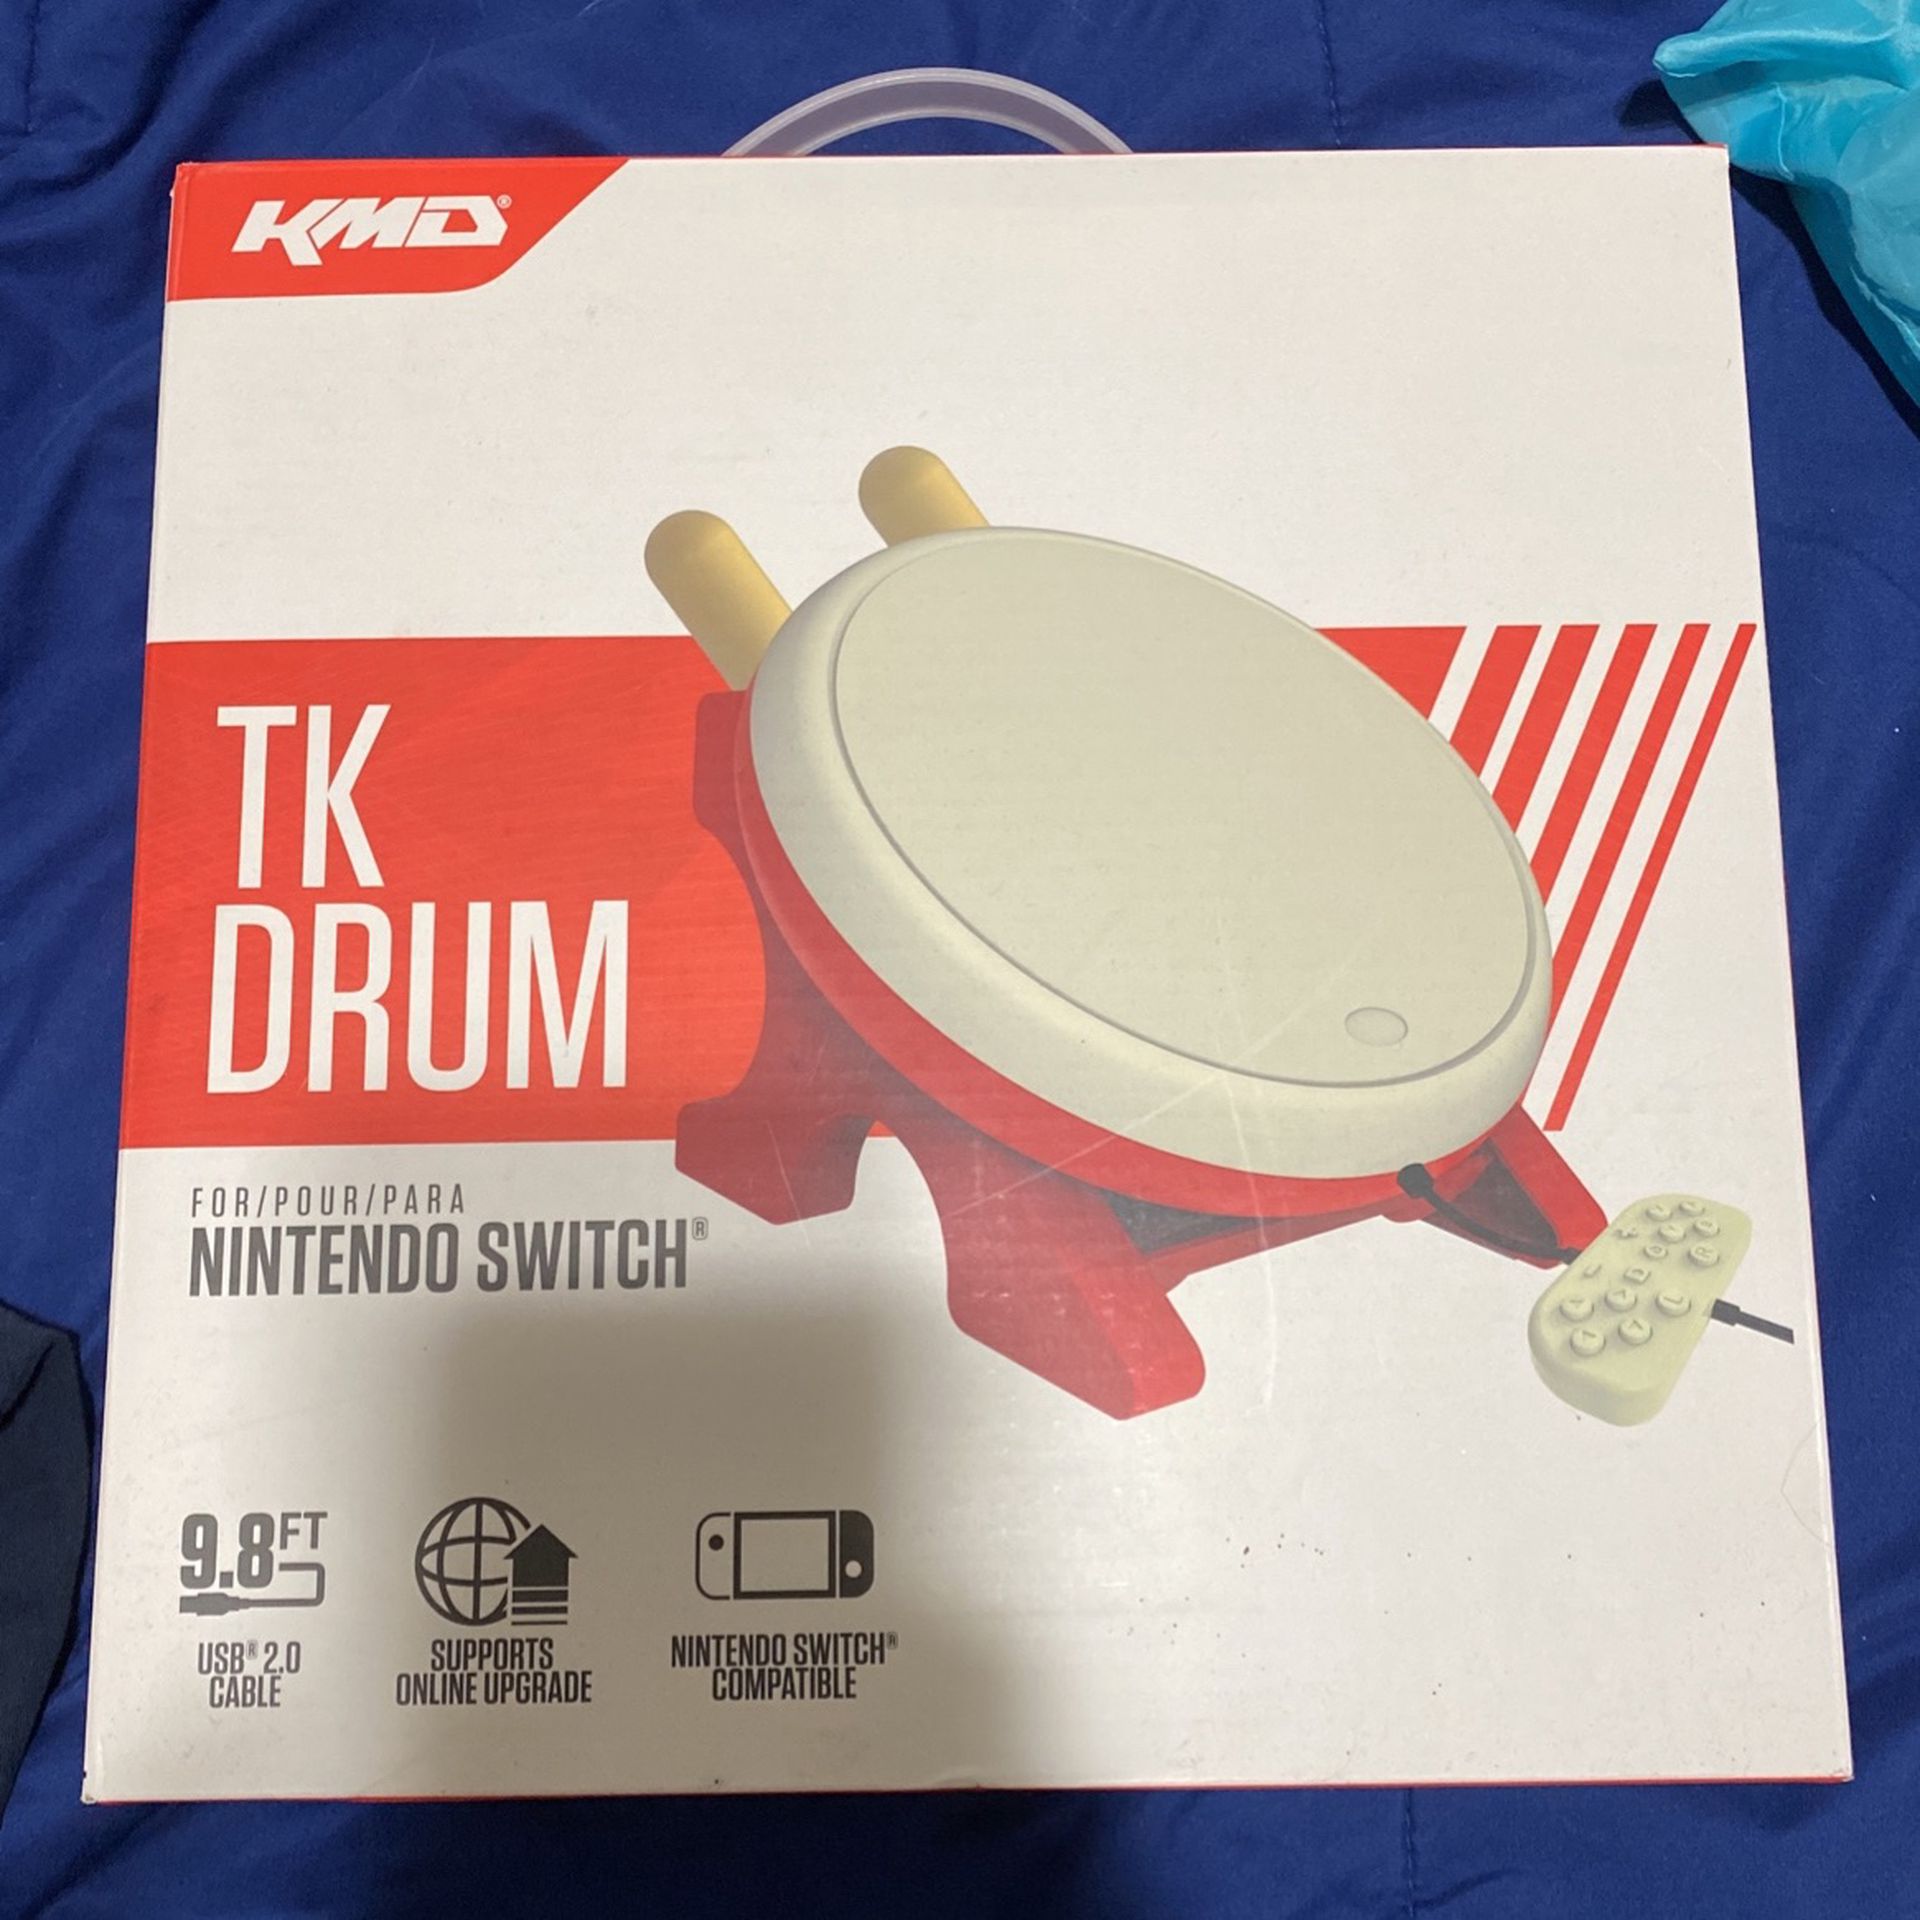 To Drum For Nintendo Switch!